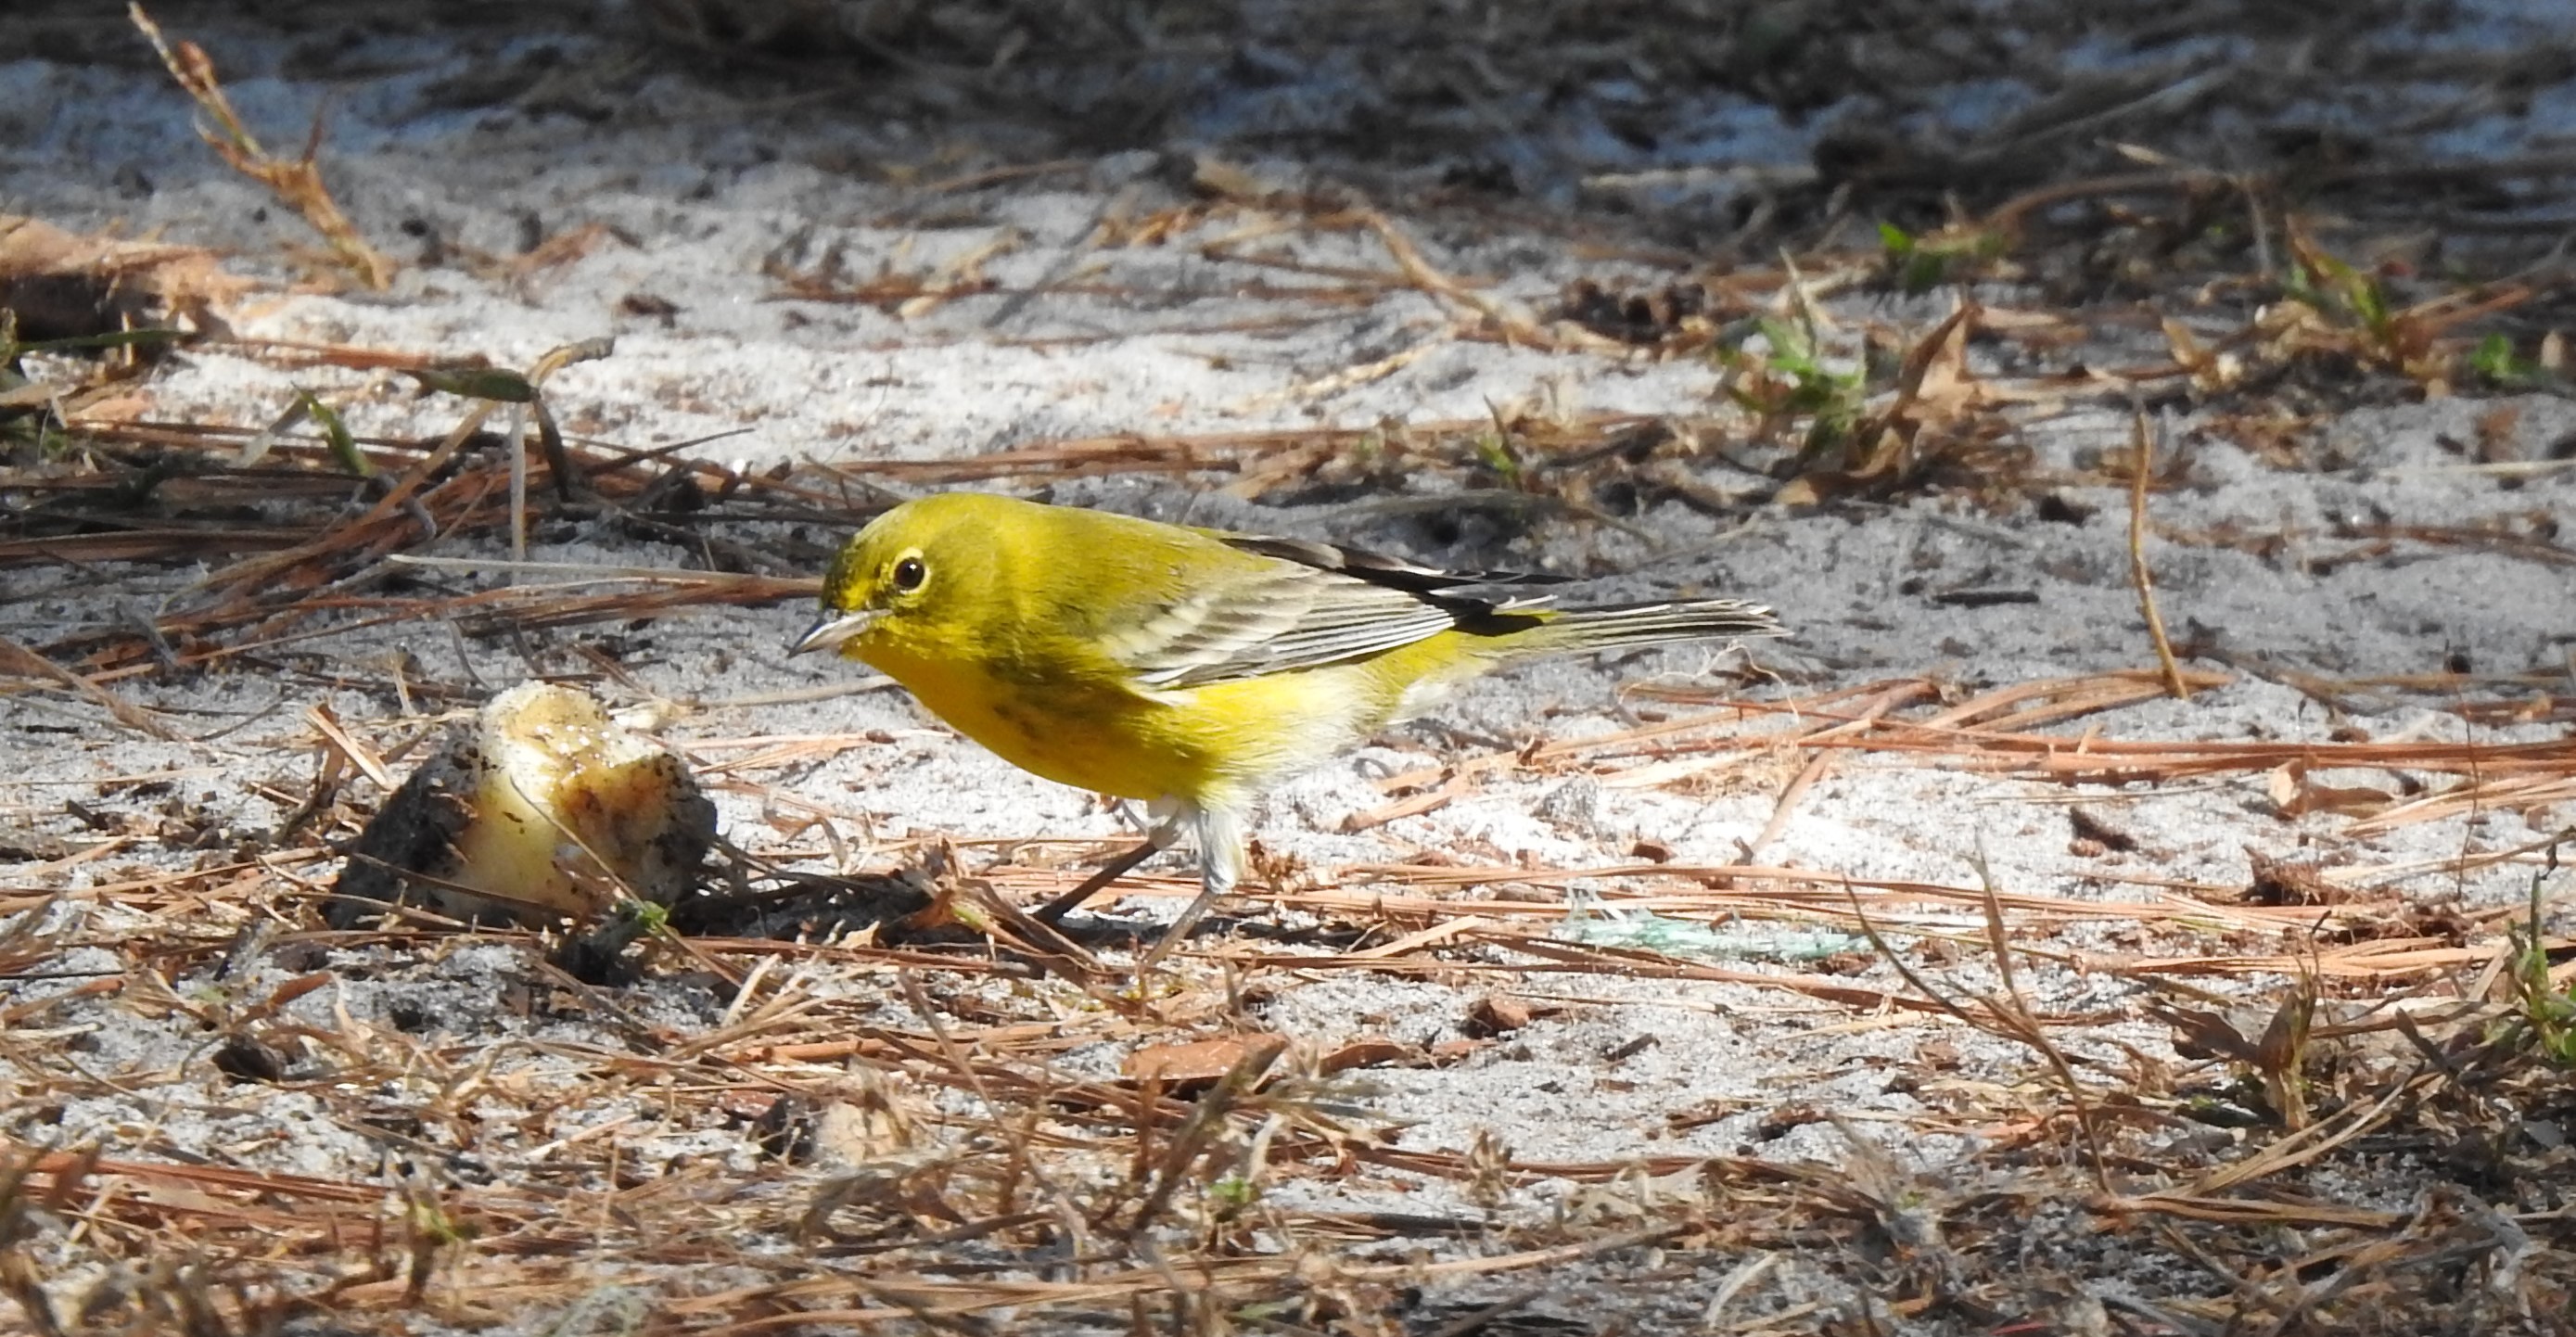 bright yellow and olive bird pecks at unidentified object on sandy ground